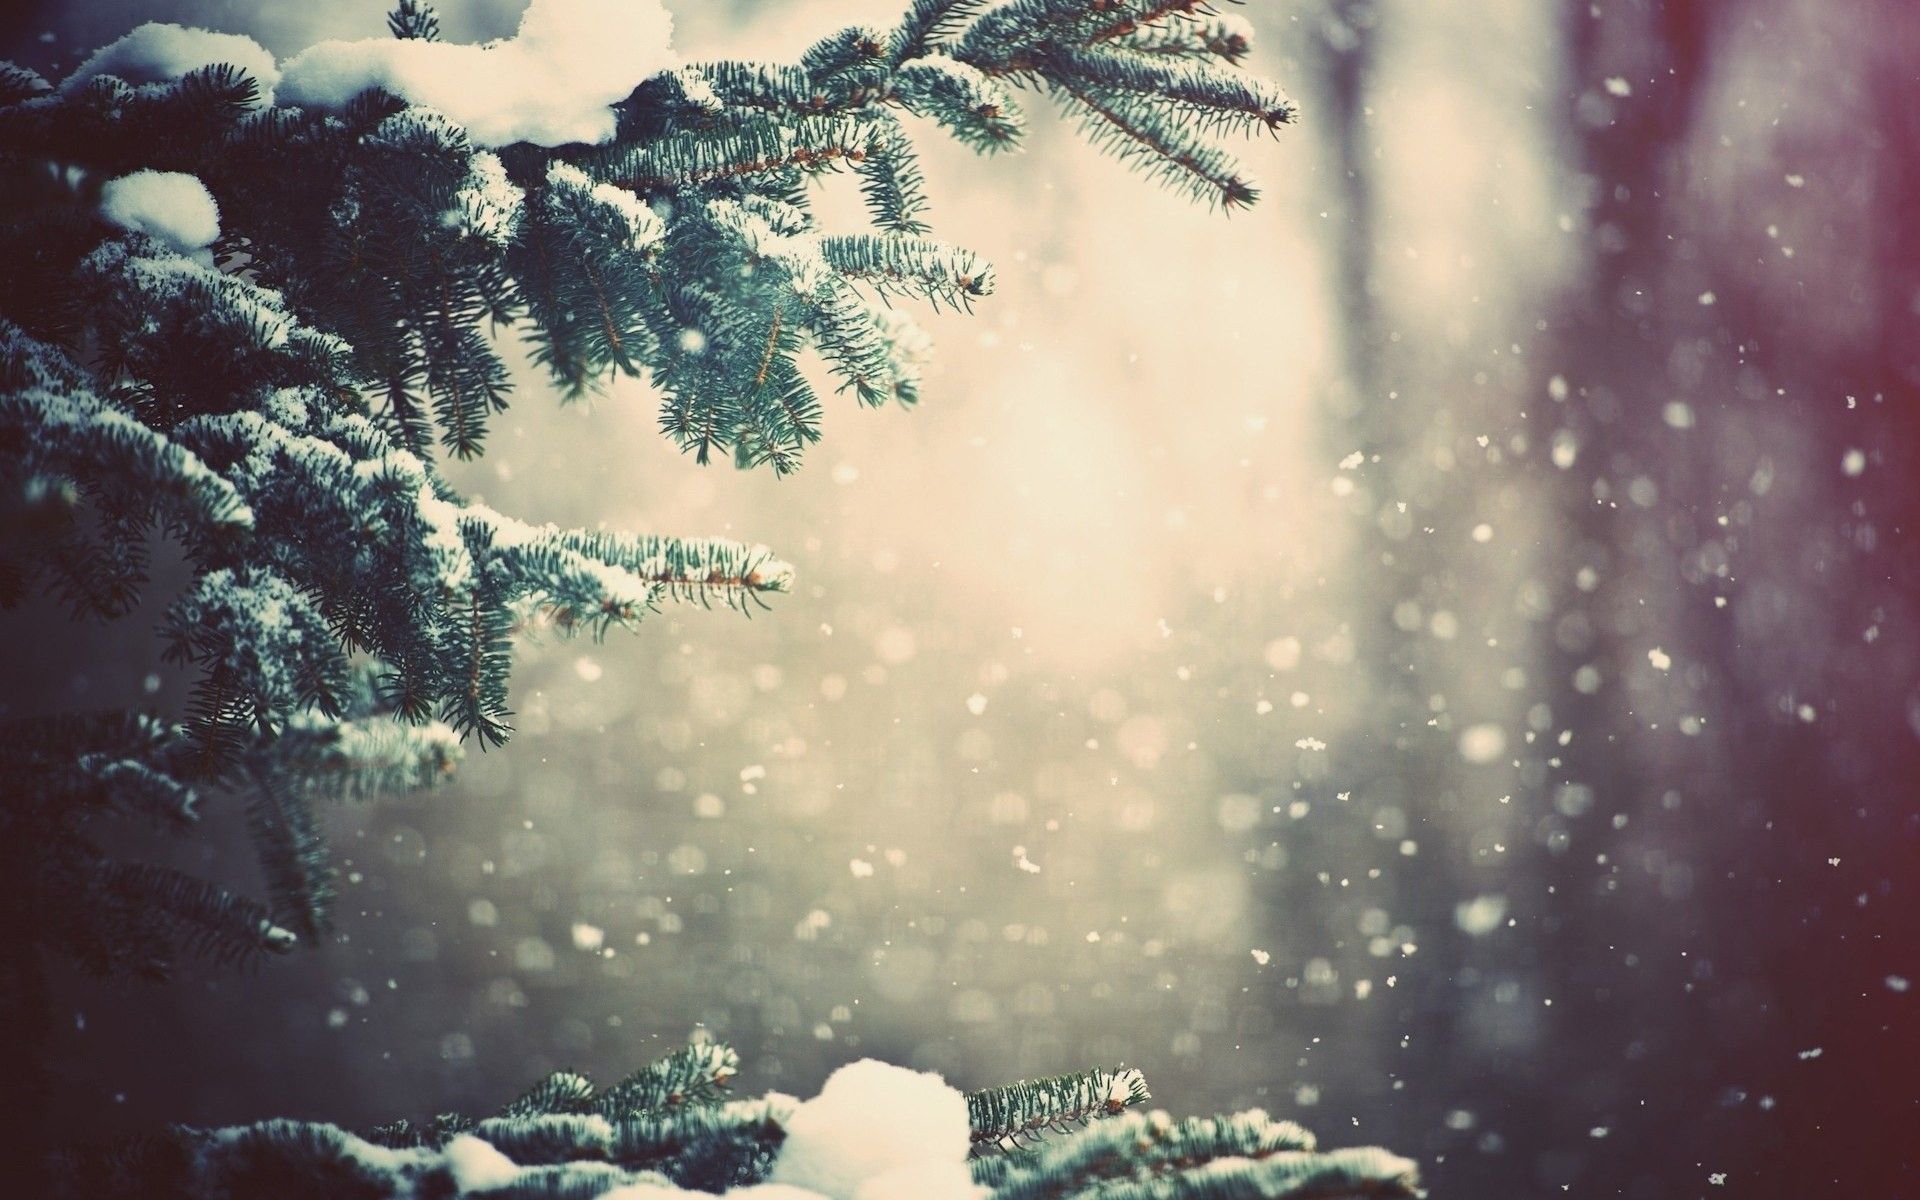 A snowy scene with pine trees in the background - Cozy